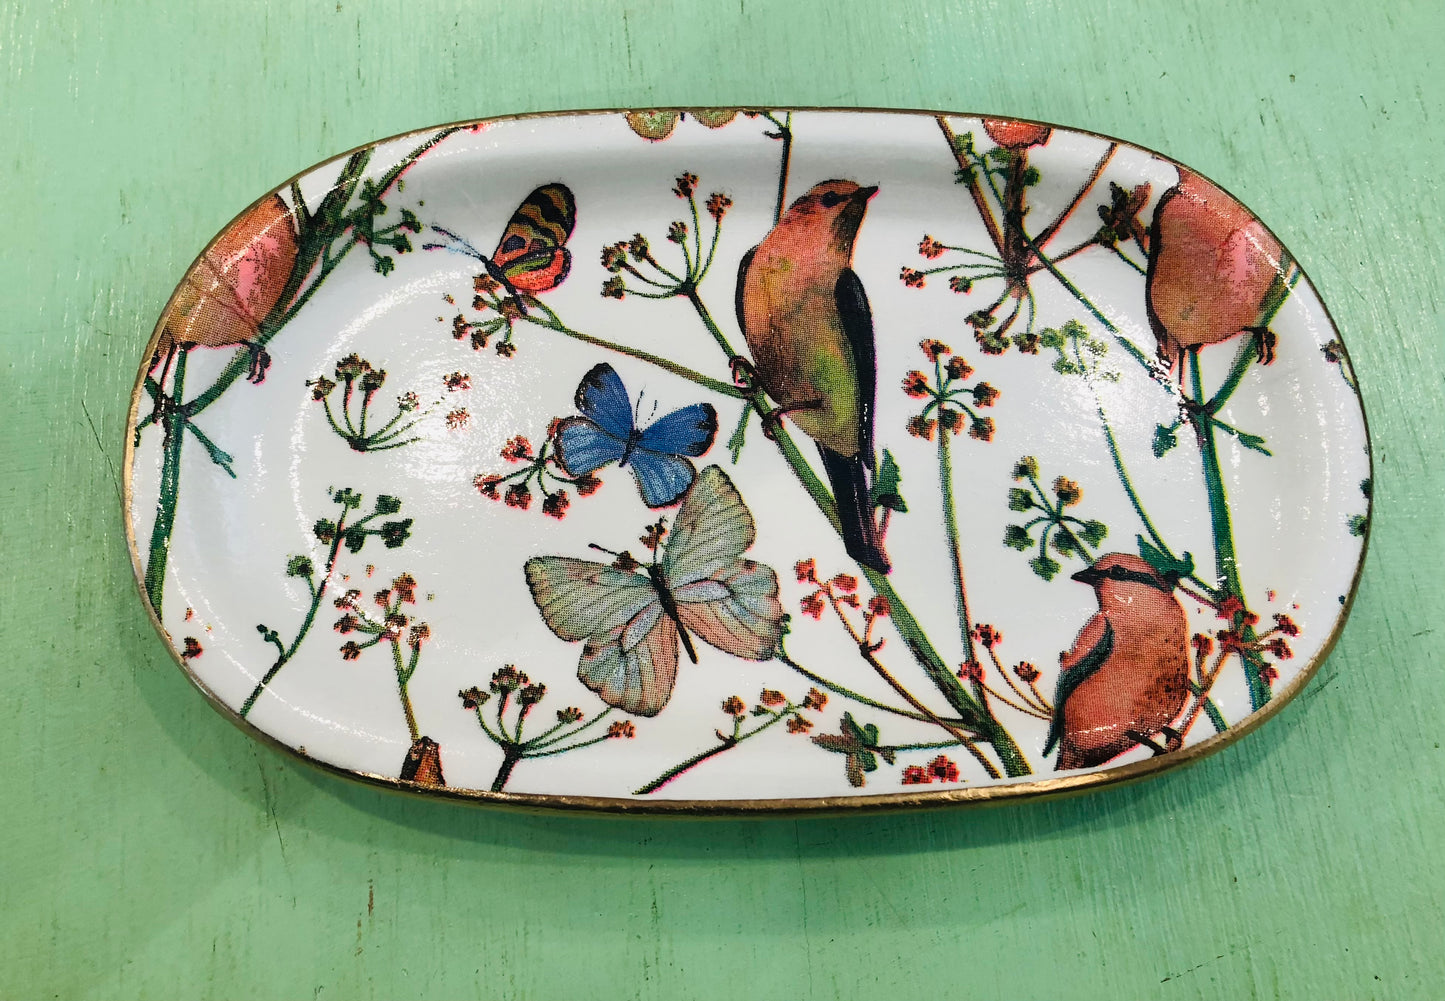 Ceramic Jewelry Tray, Birds and Butterfly Motif